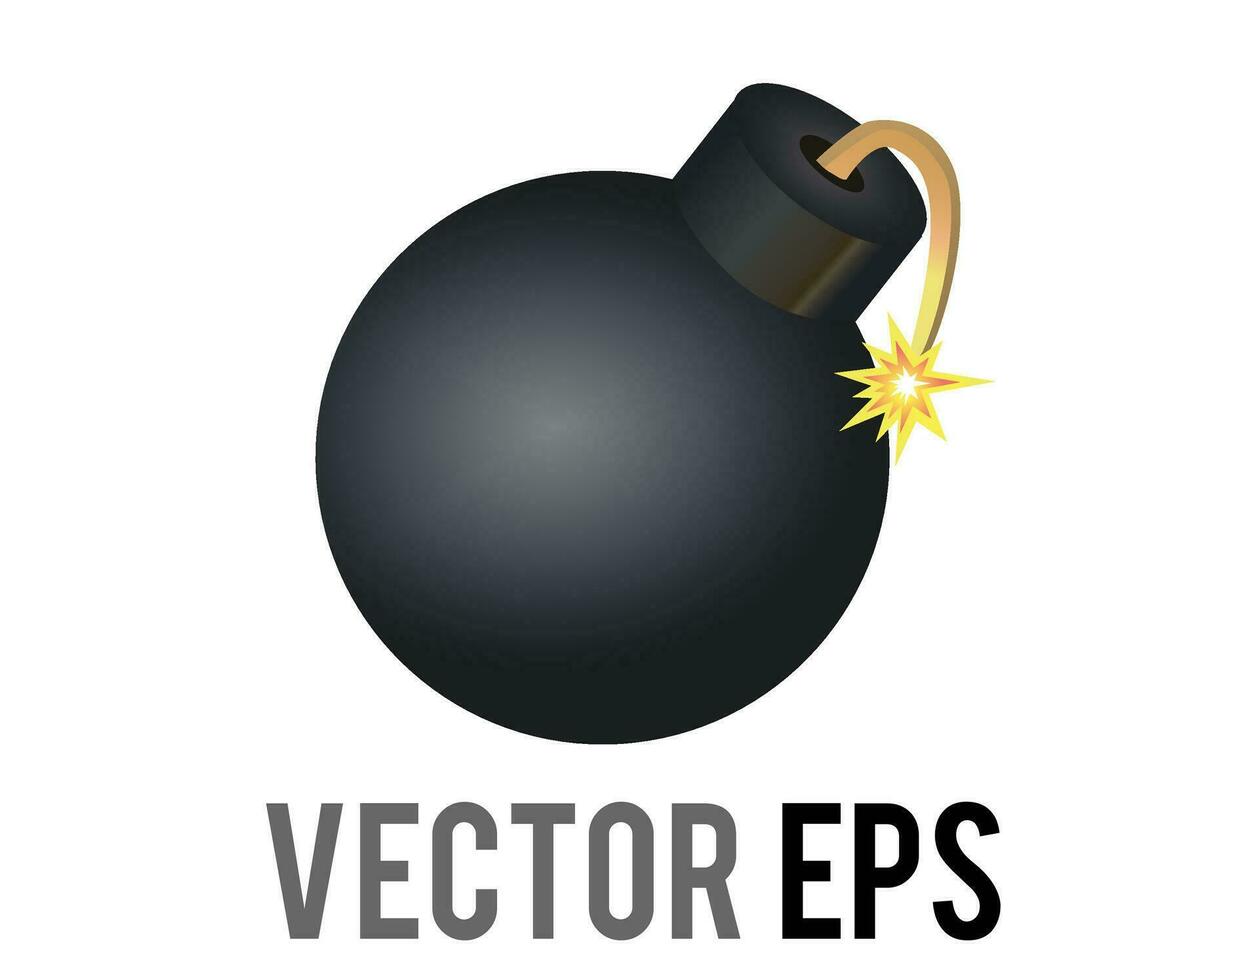 Vector cartoon styled black bomb icon, depicted as black ball with burning fuse